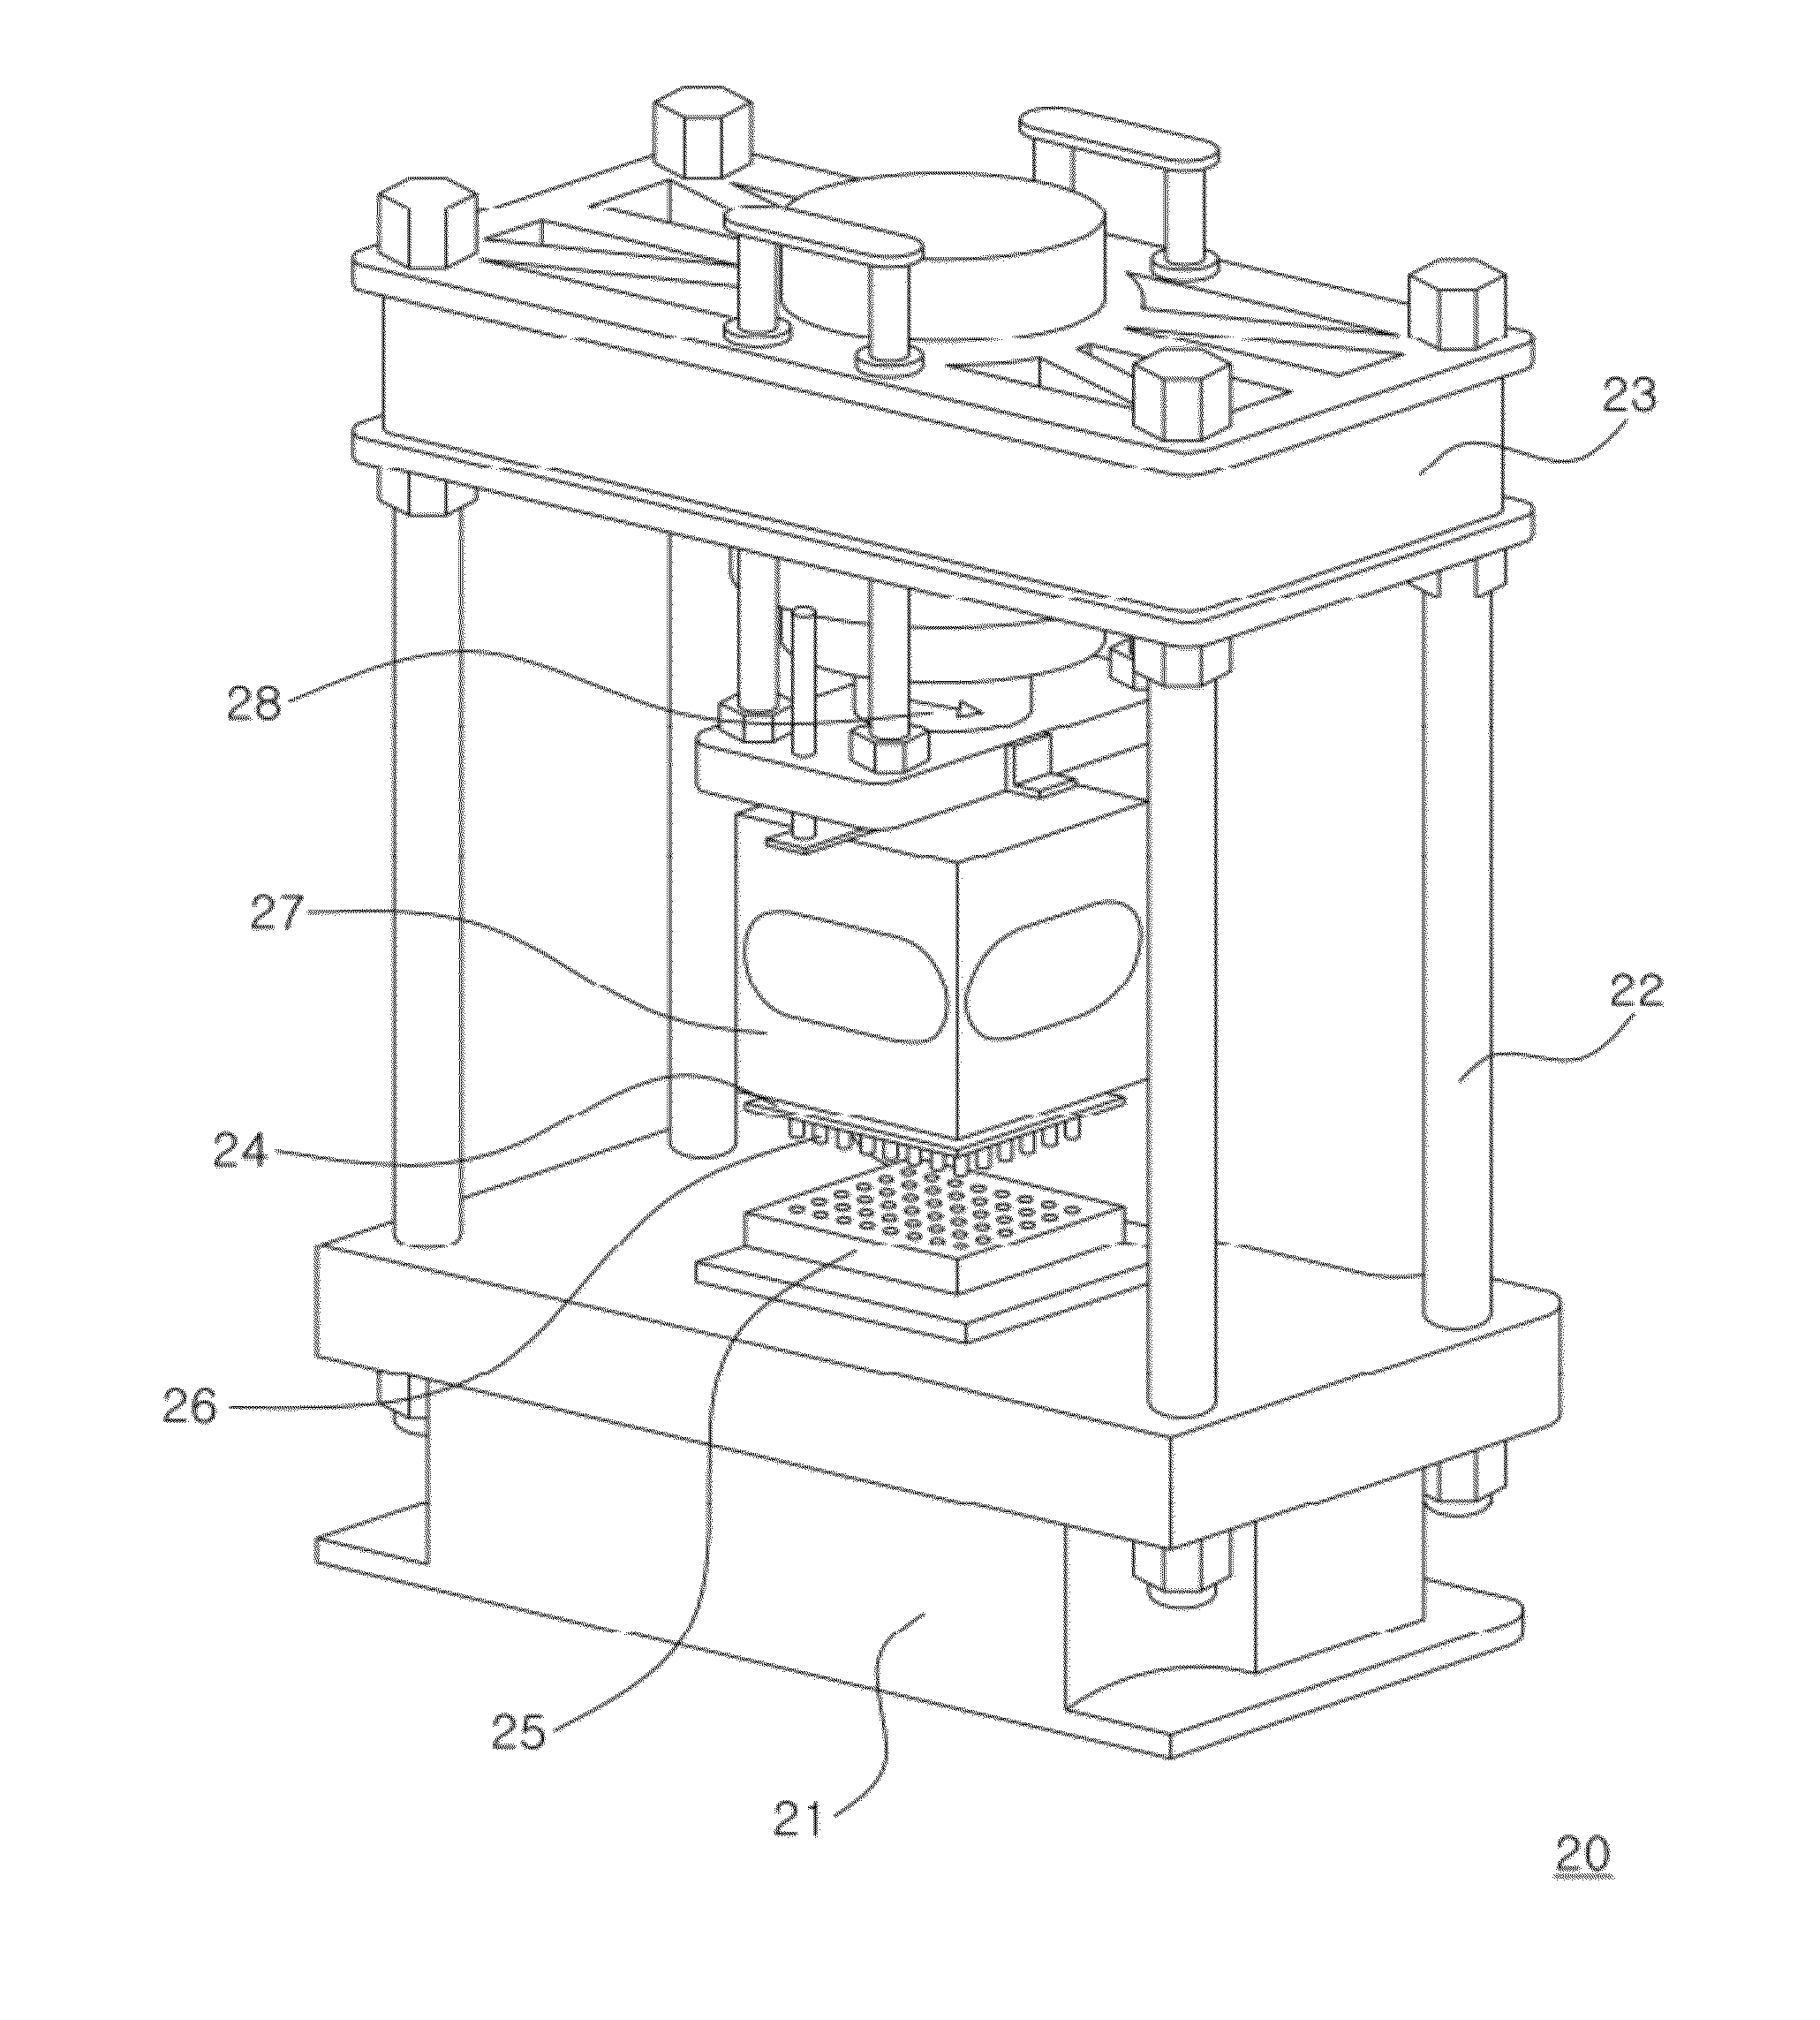 Method and apparatus for manufacturing a bullet charged with compressible composite explosives